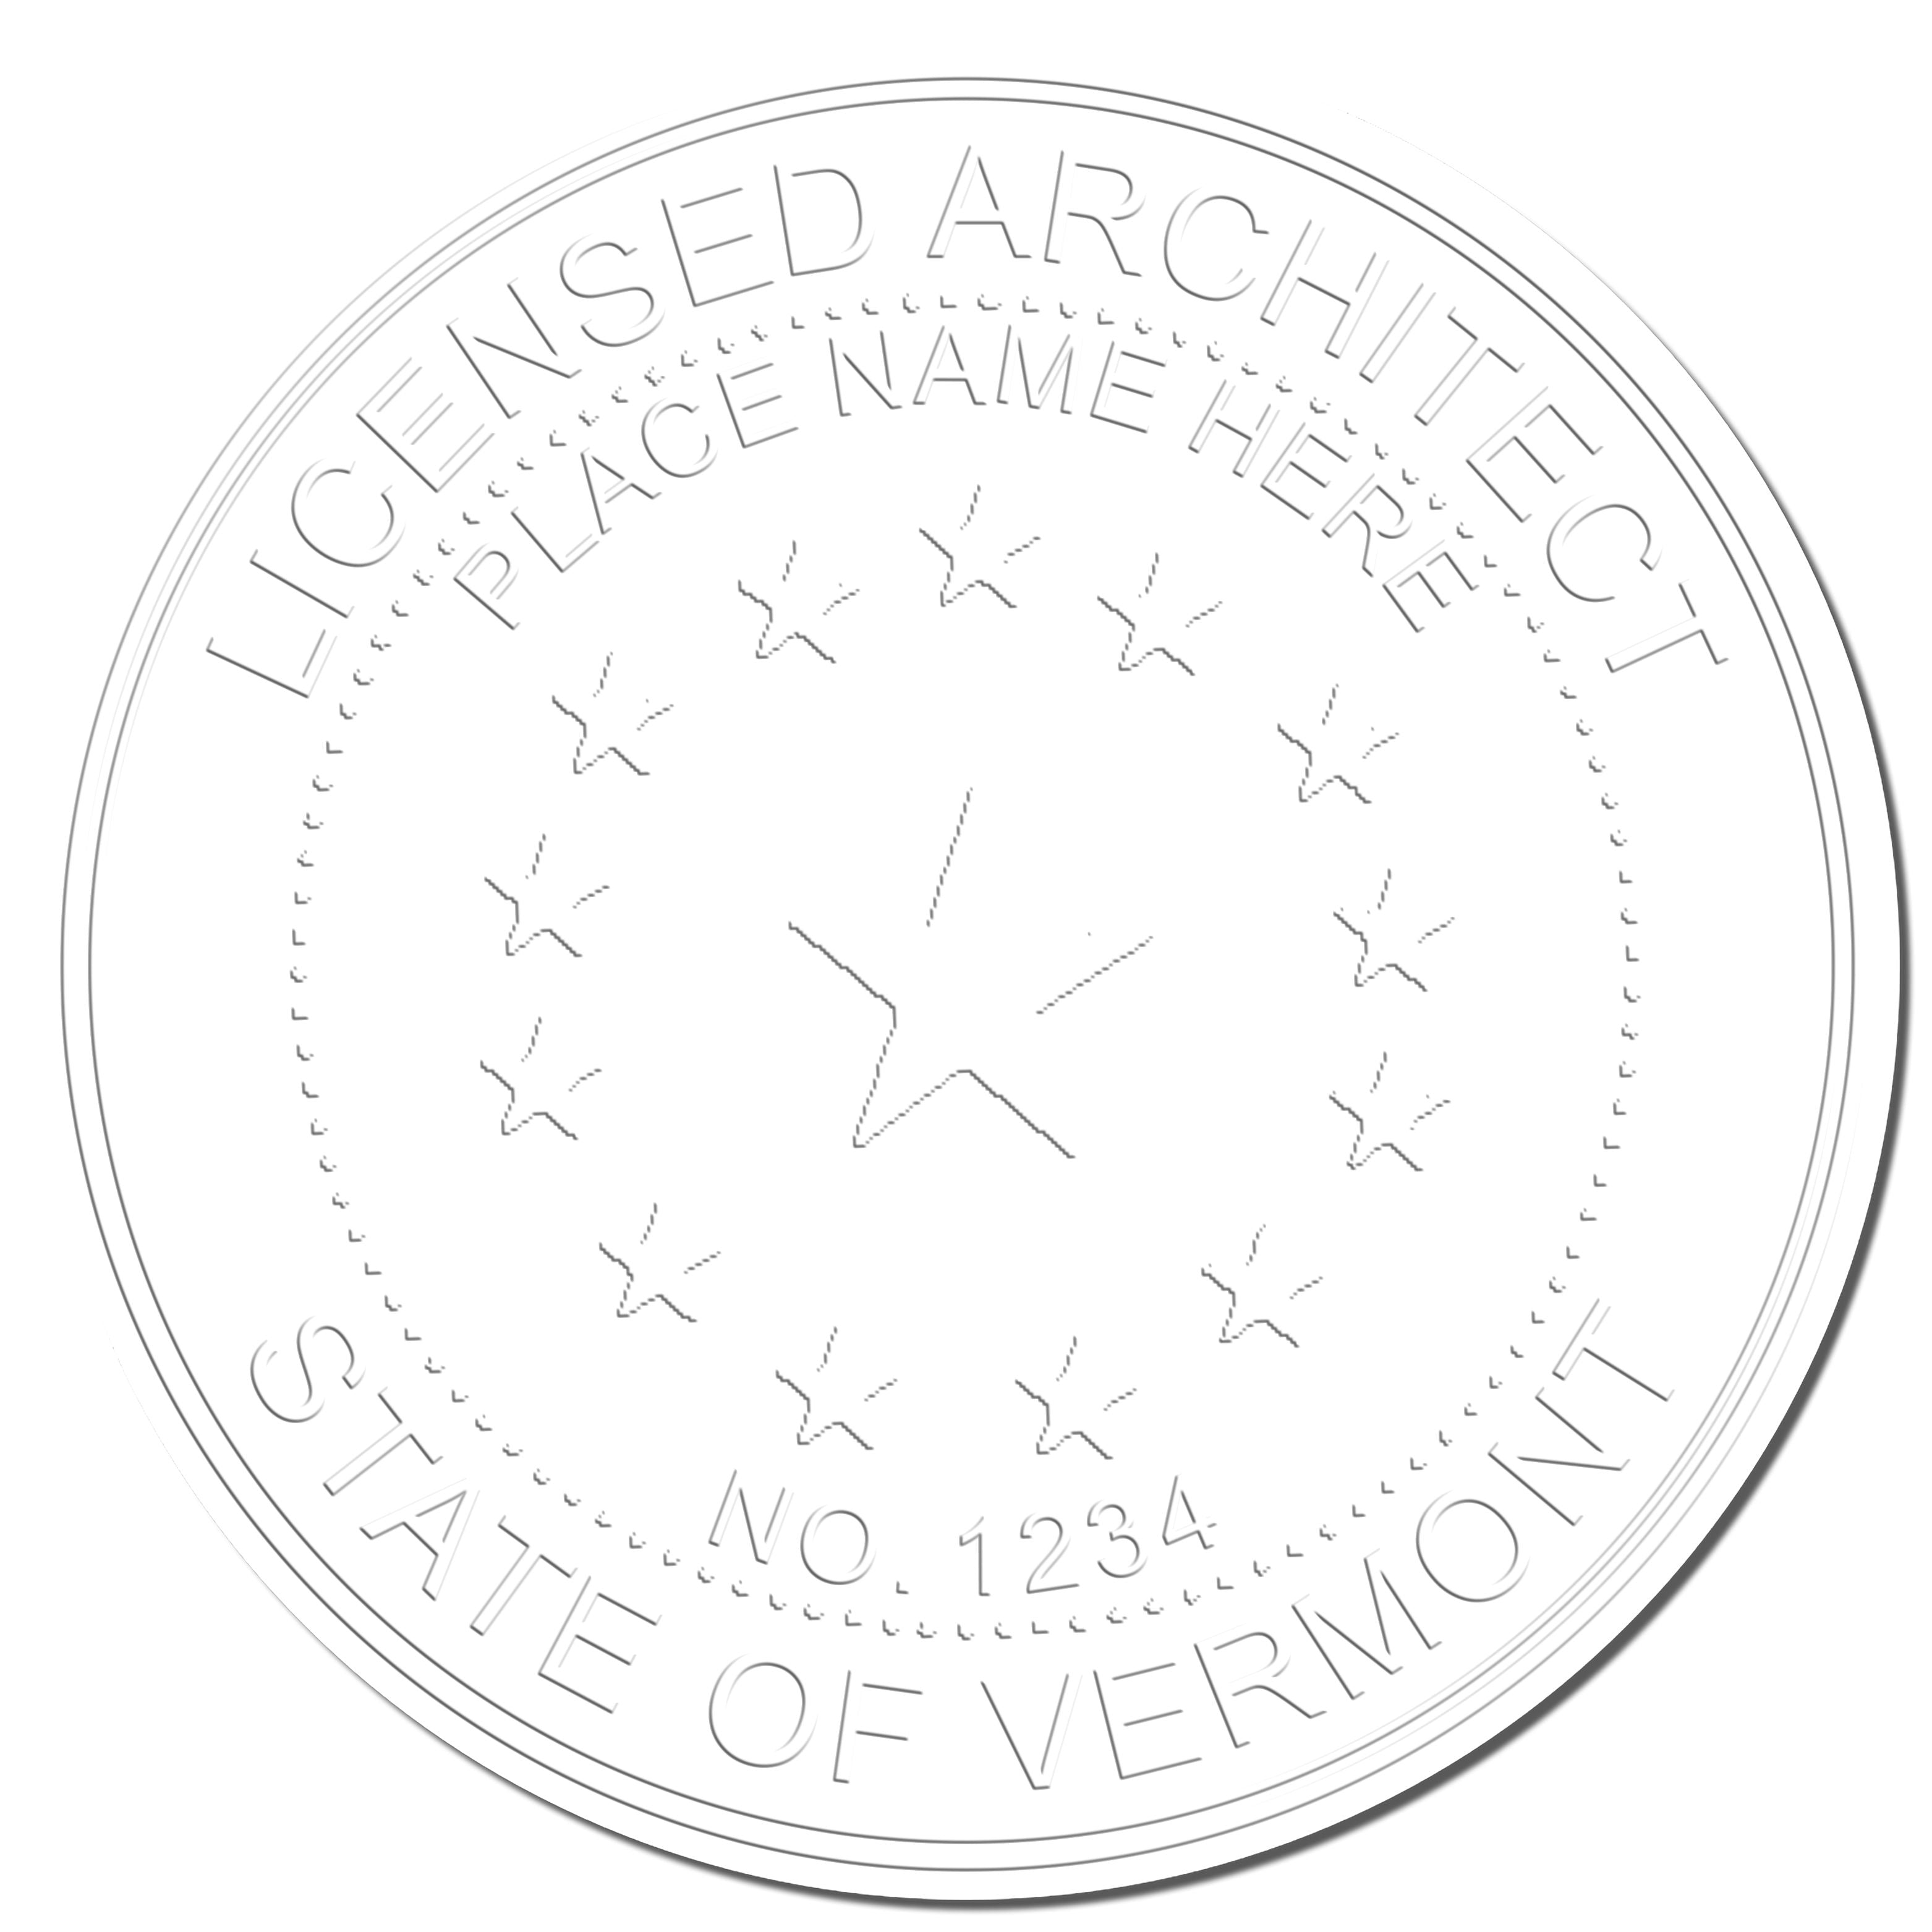 This paper is stamped with a sample imprint of the Gift Vermont Architect Seal, signifying its quality and reliability.